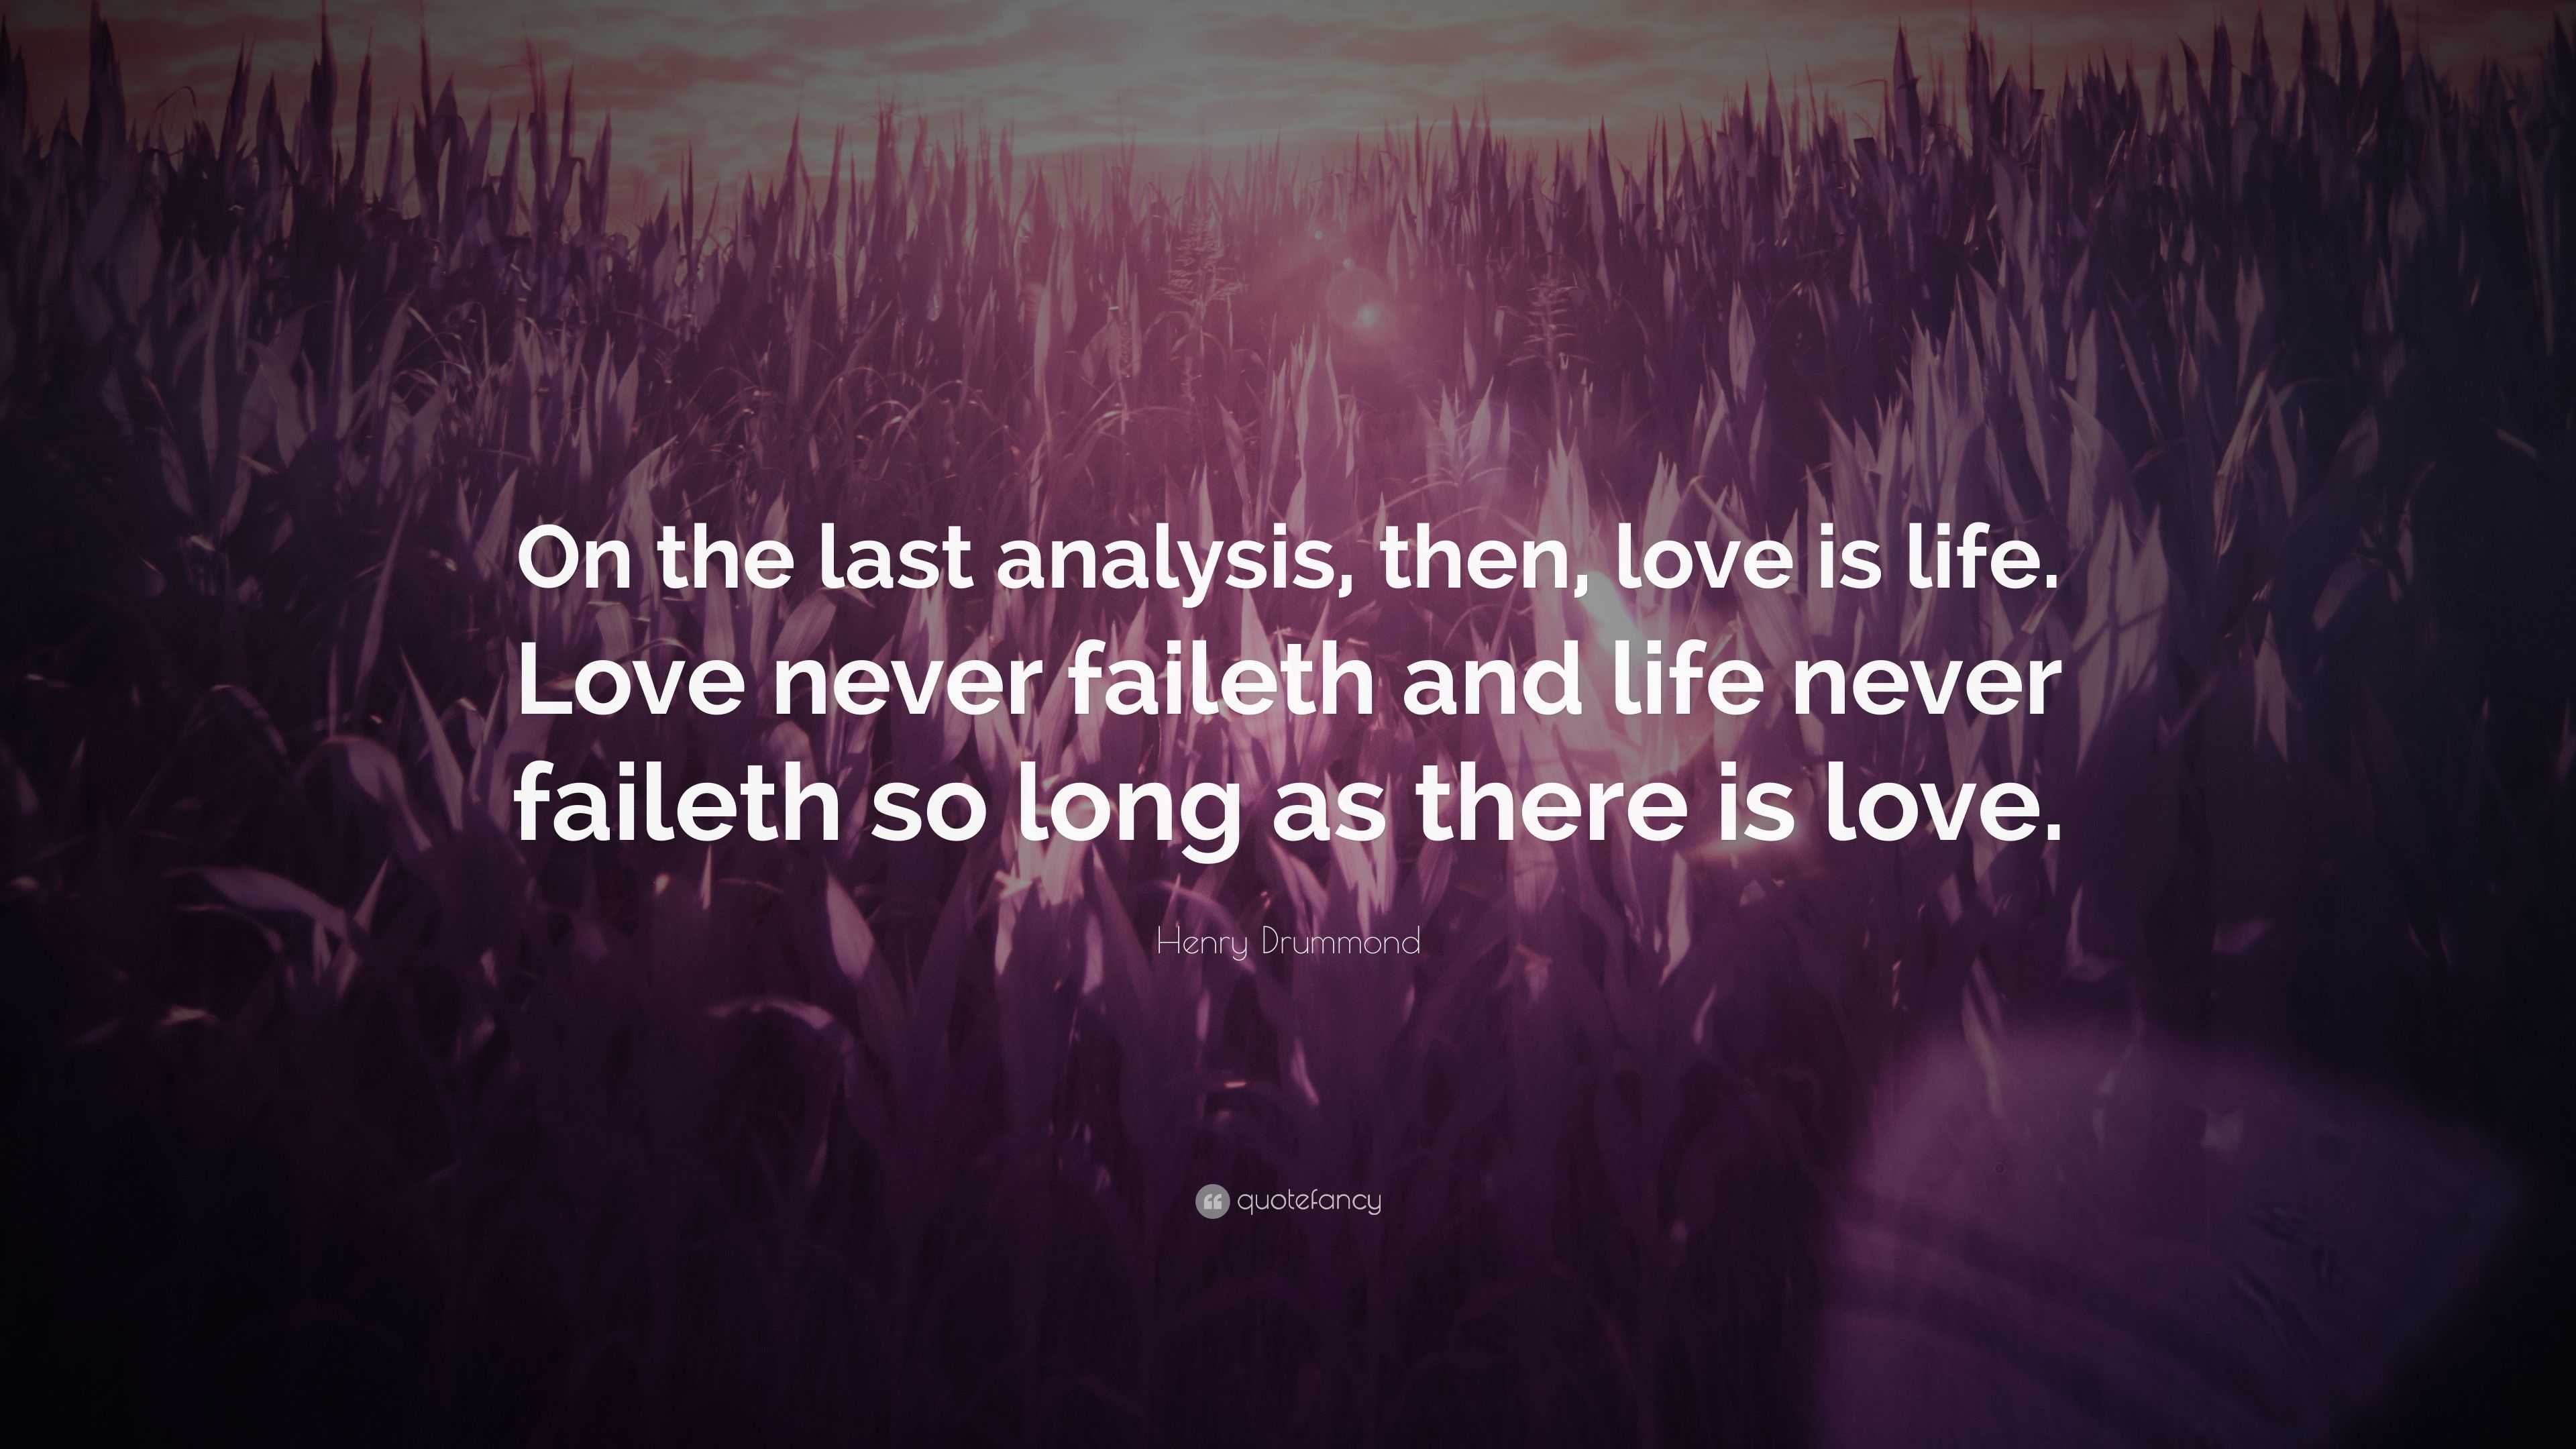 Henry Drummond Quote “ the last analysis then love is life